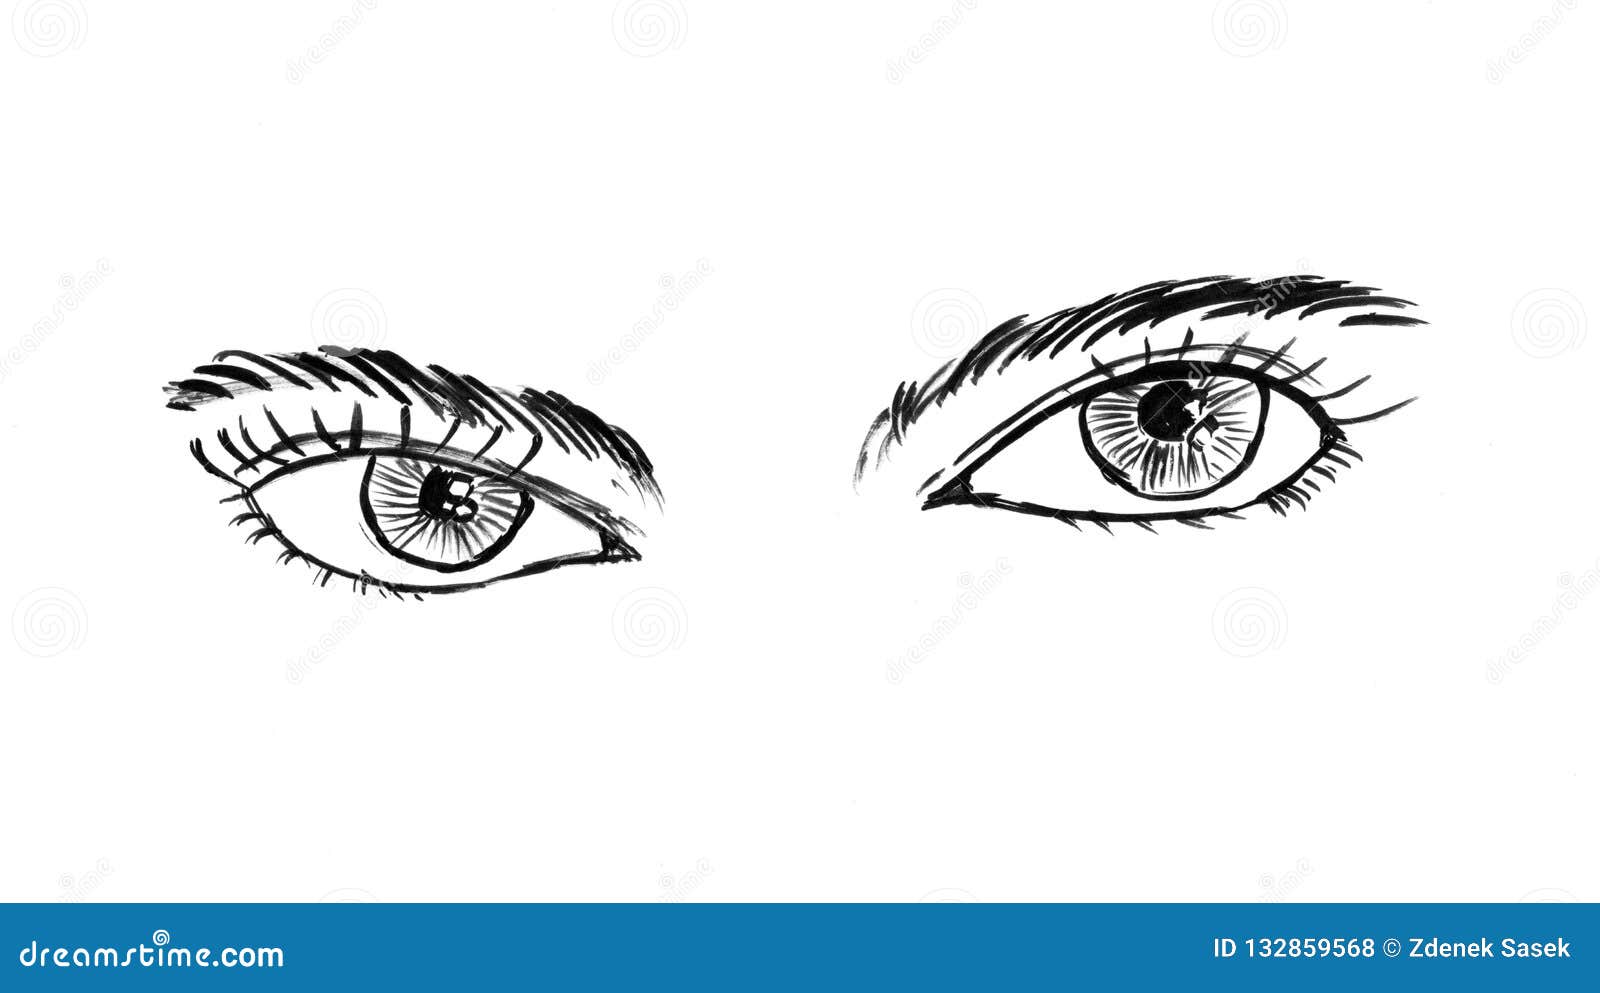 Eye, Nose, Lip Drawing Reference Guide | Drawin...